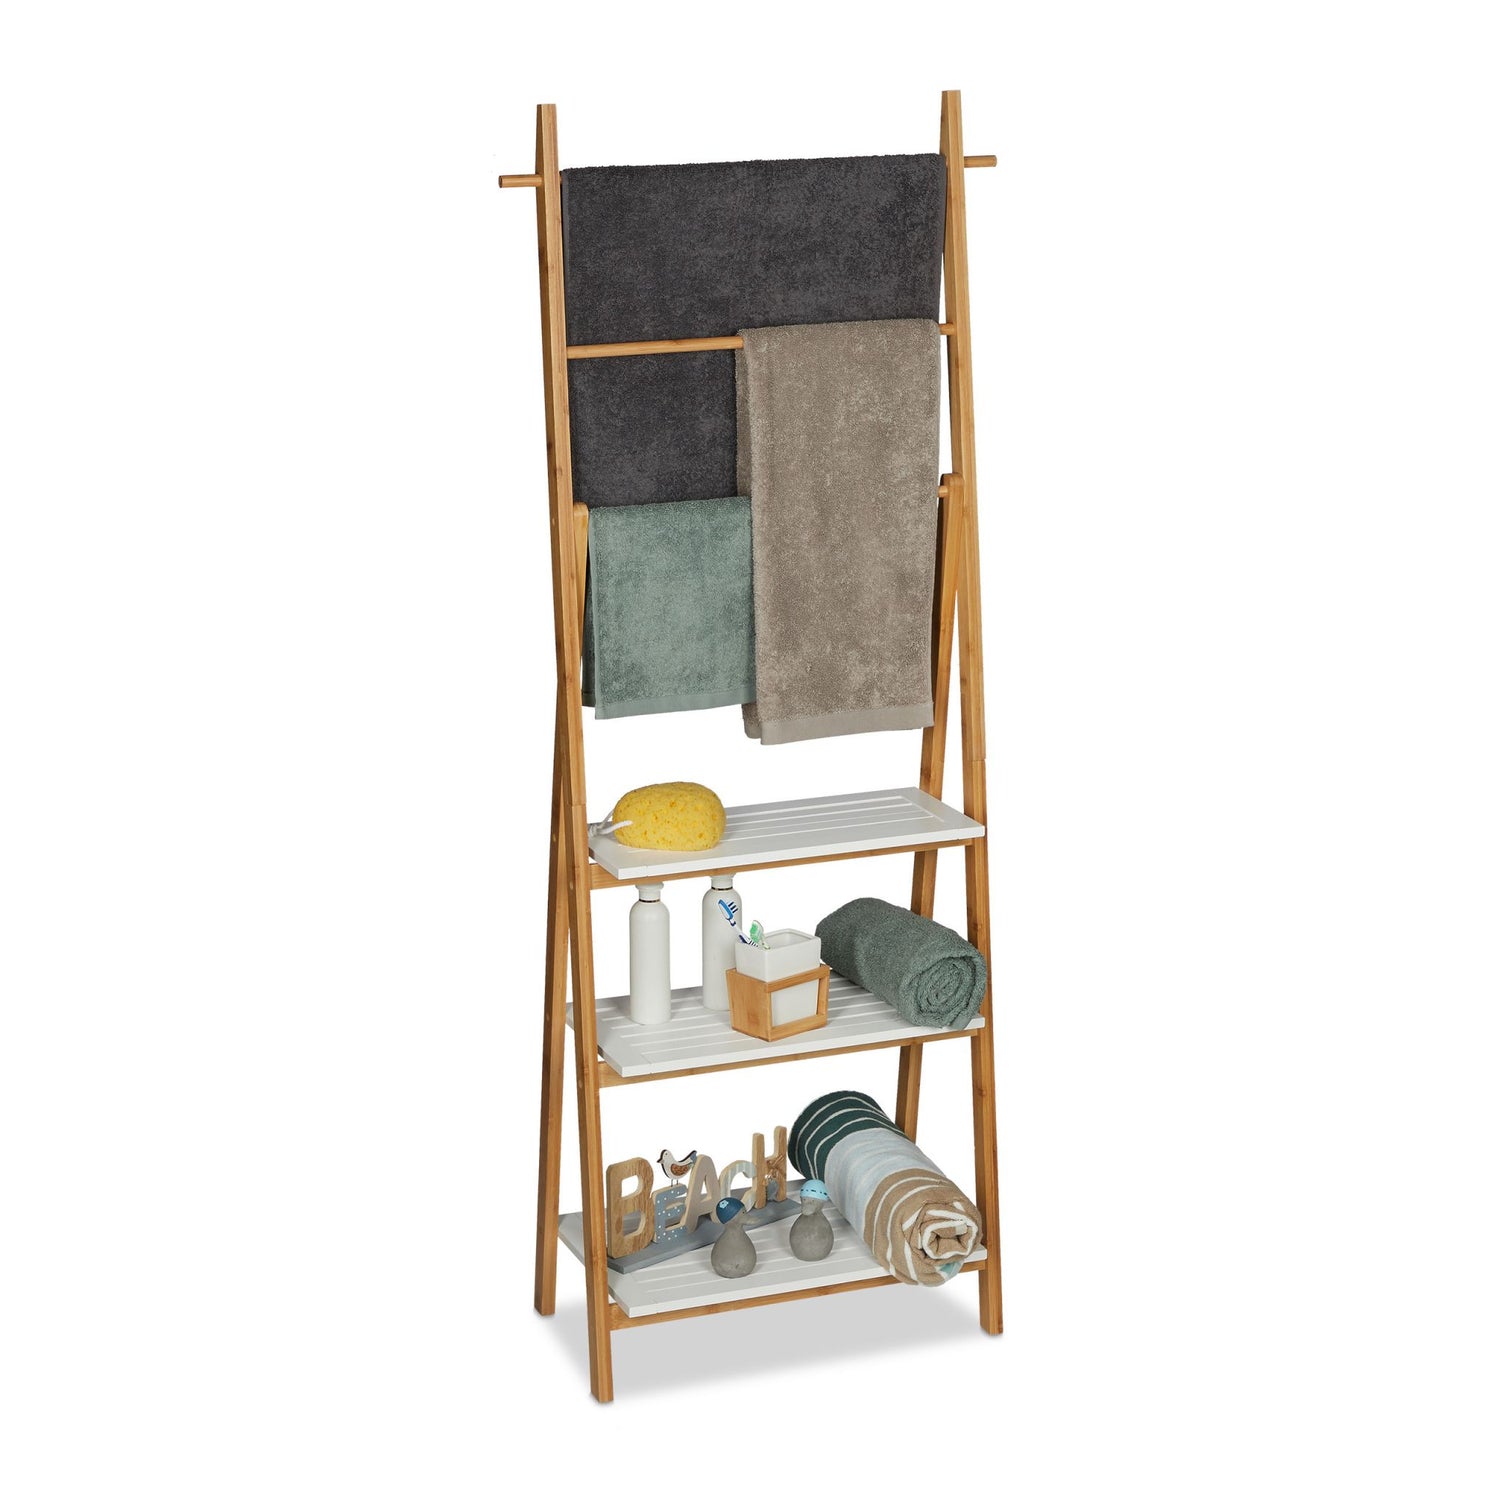 RelaxDays Bamboo Towel Stand Bamboo Bathrooms